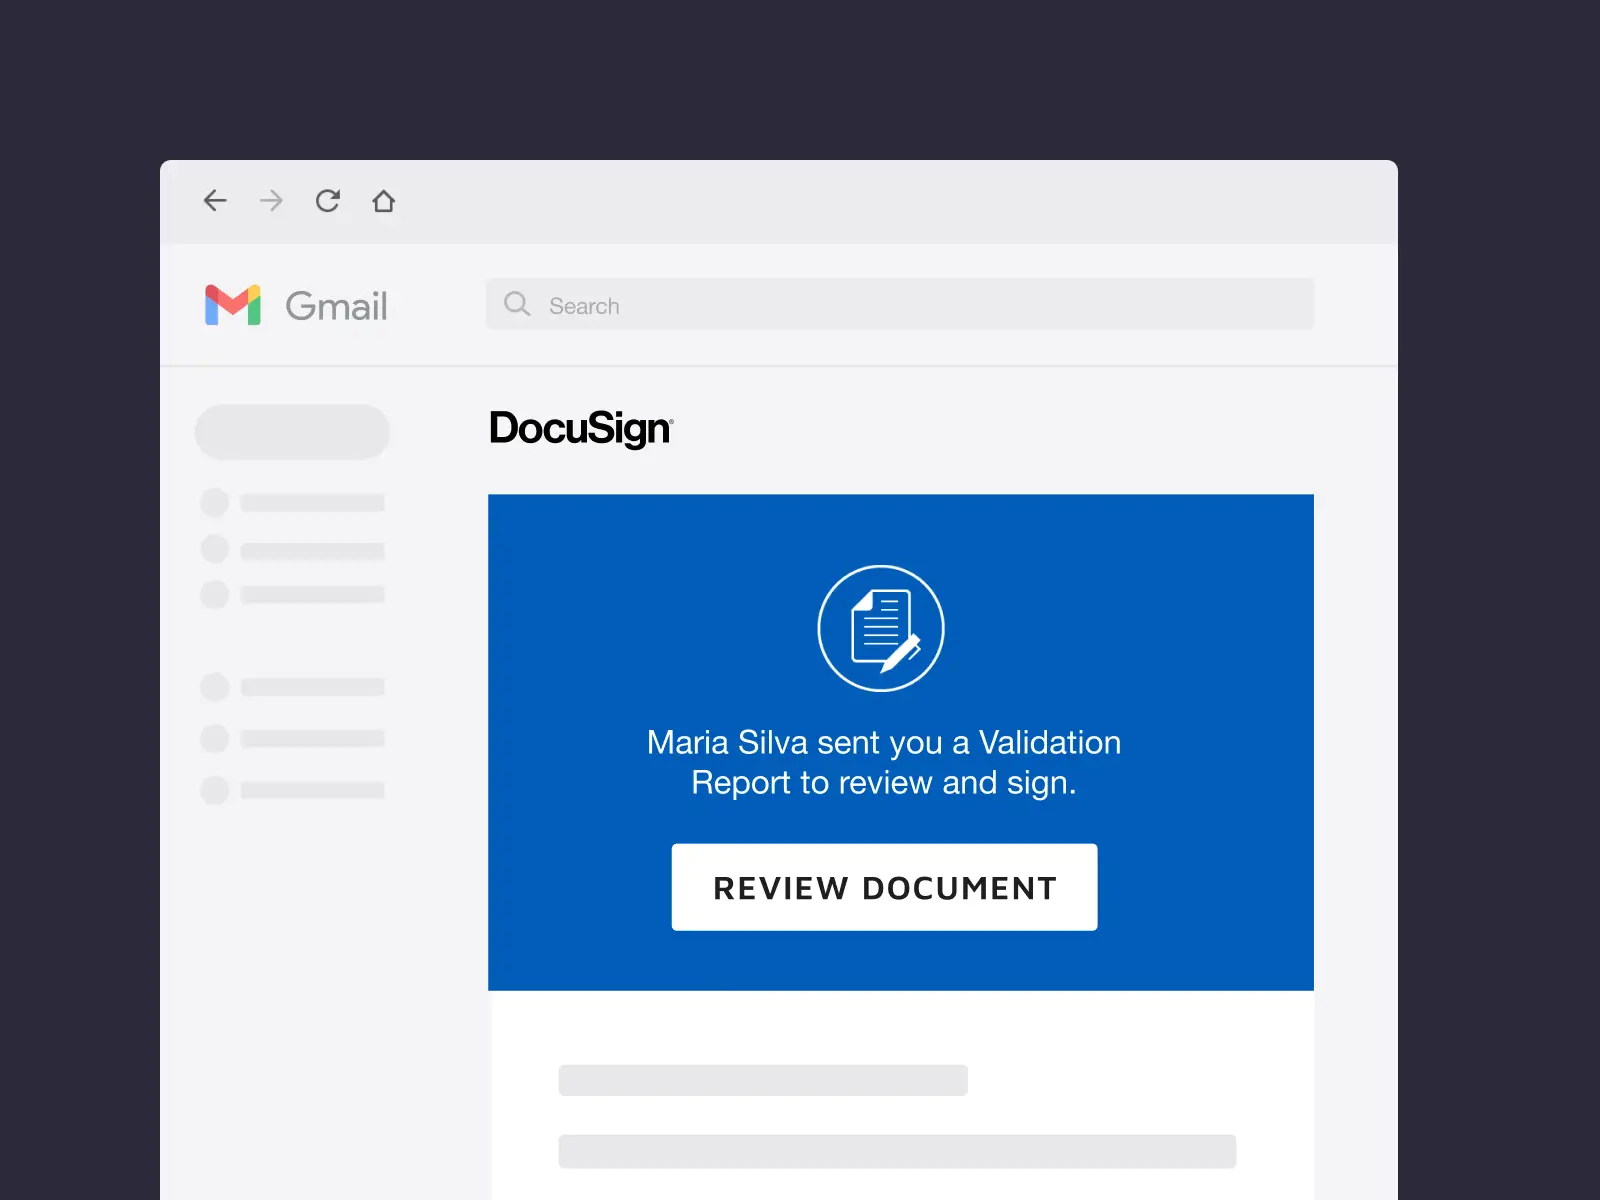 Screenshot of an email from DocuSign containing a document for the recipient to review and sign